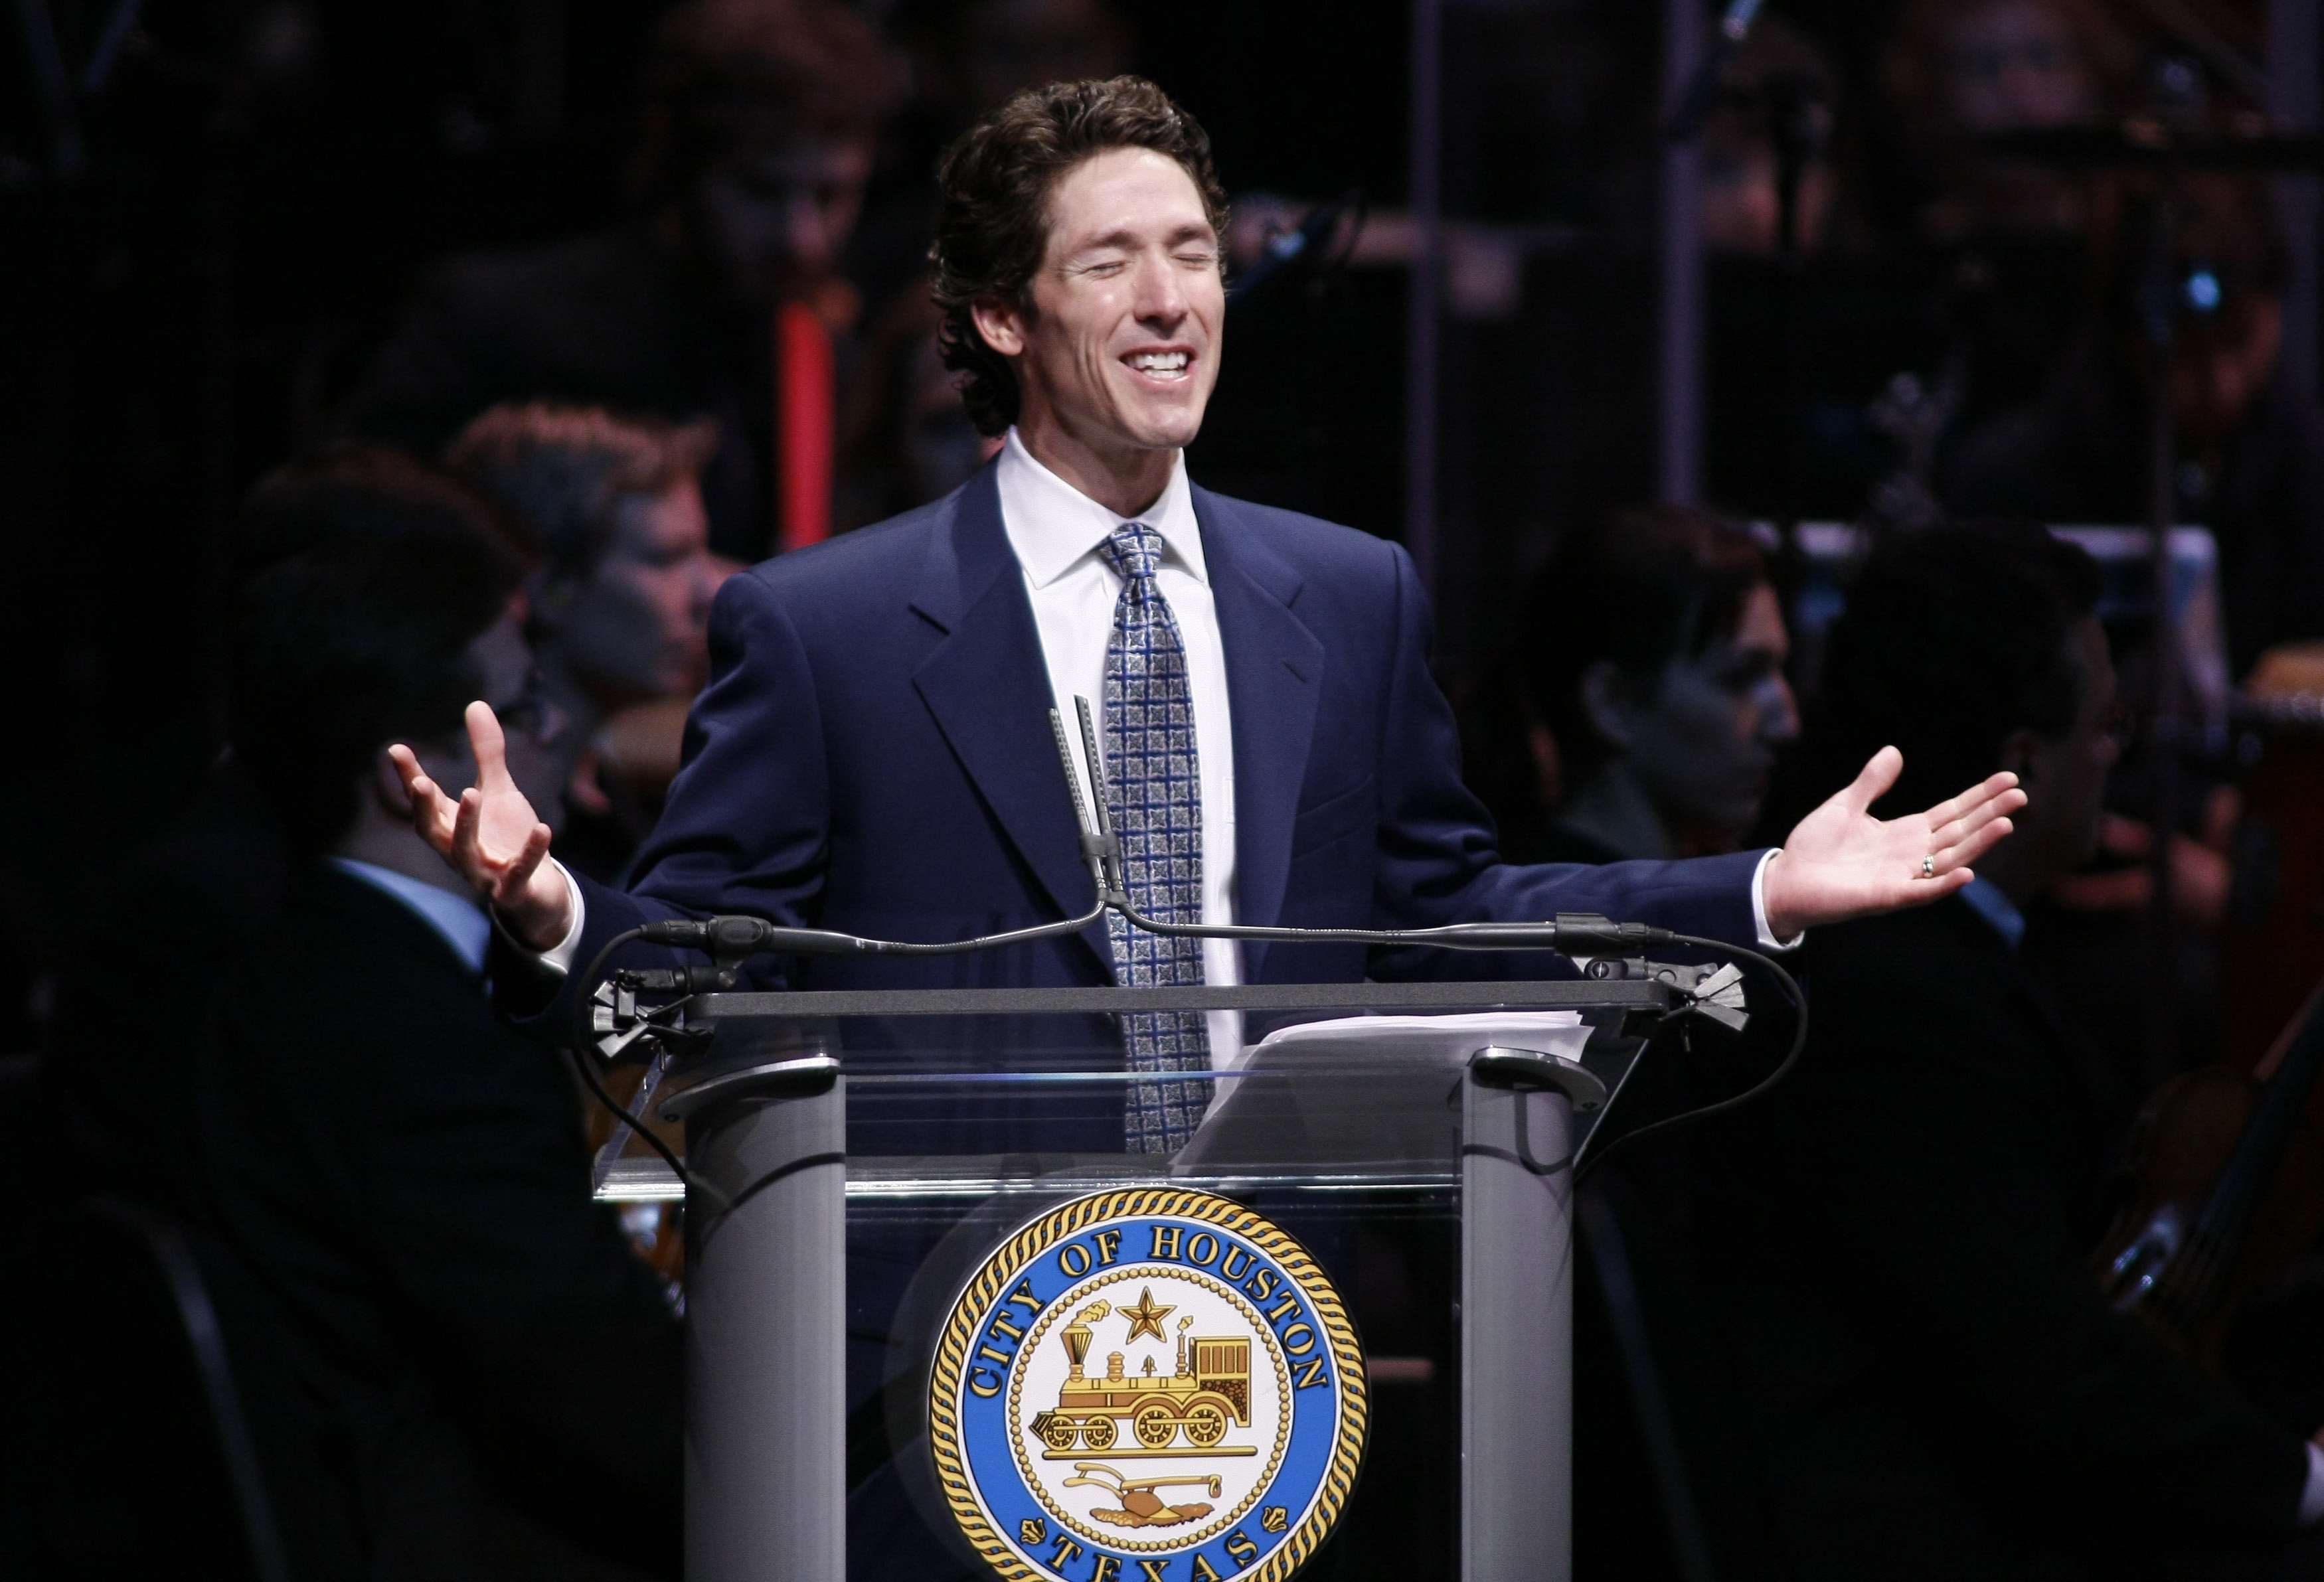 image for Joel Osteen: Televangelist Whose Church Closed During Hurricane Harvey Tells Victims not to Have 'Poor Me' Attitude